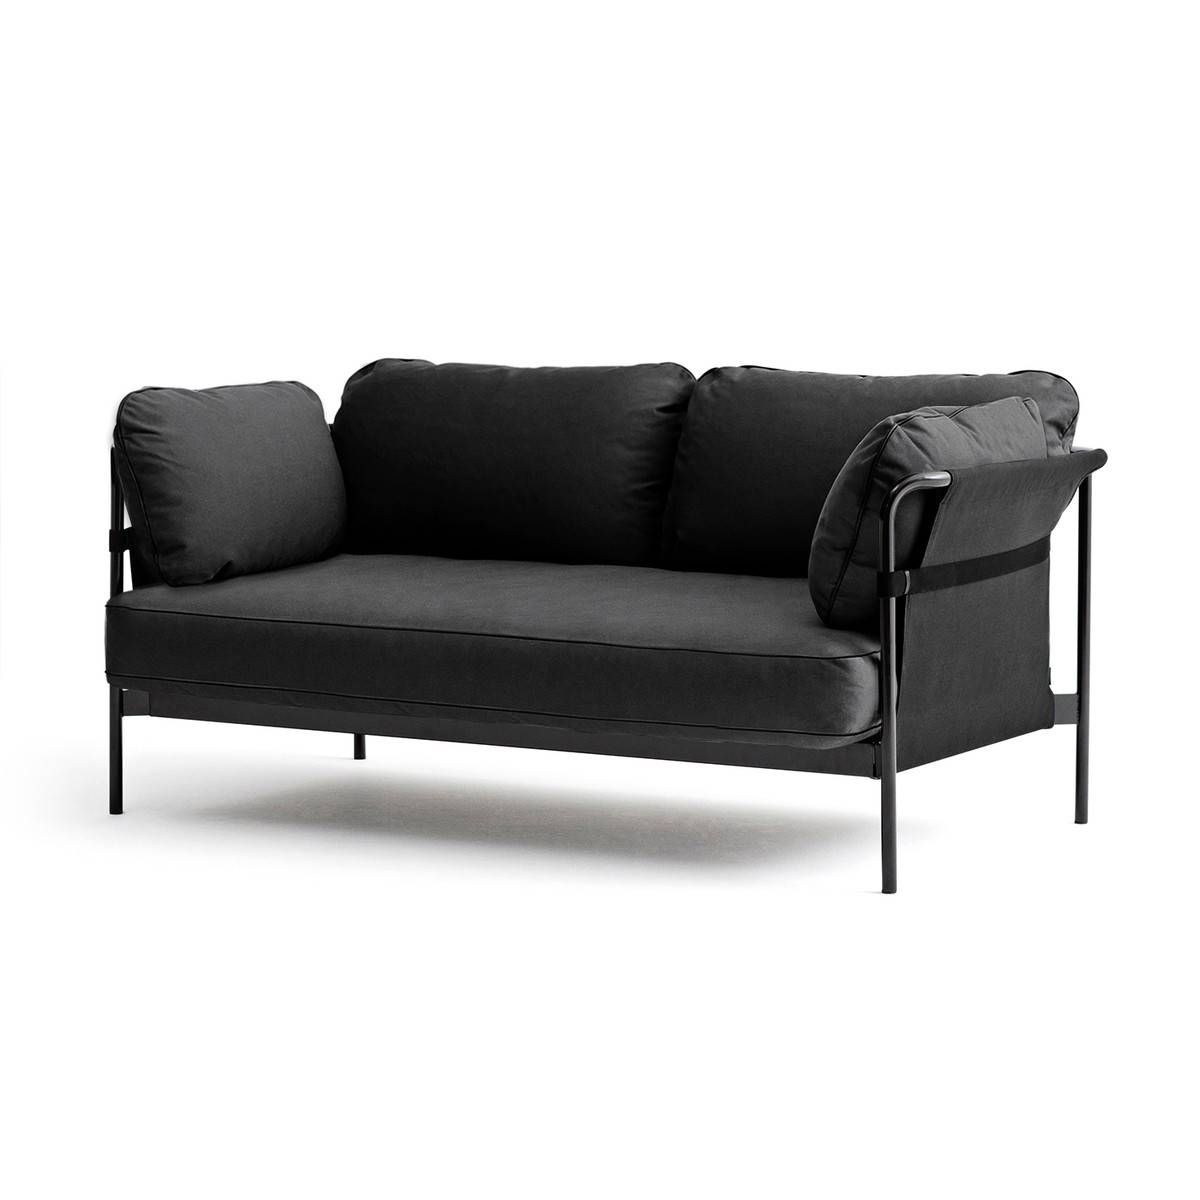 Can 2 Seater Sofahay In Our Interior Design Shop With Regard To Black 2 Seater Sofas (View 28 of 30)